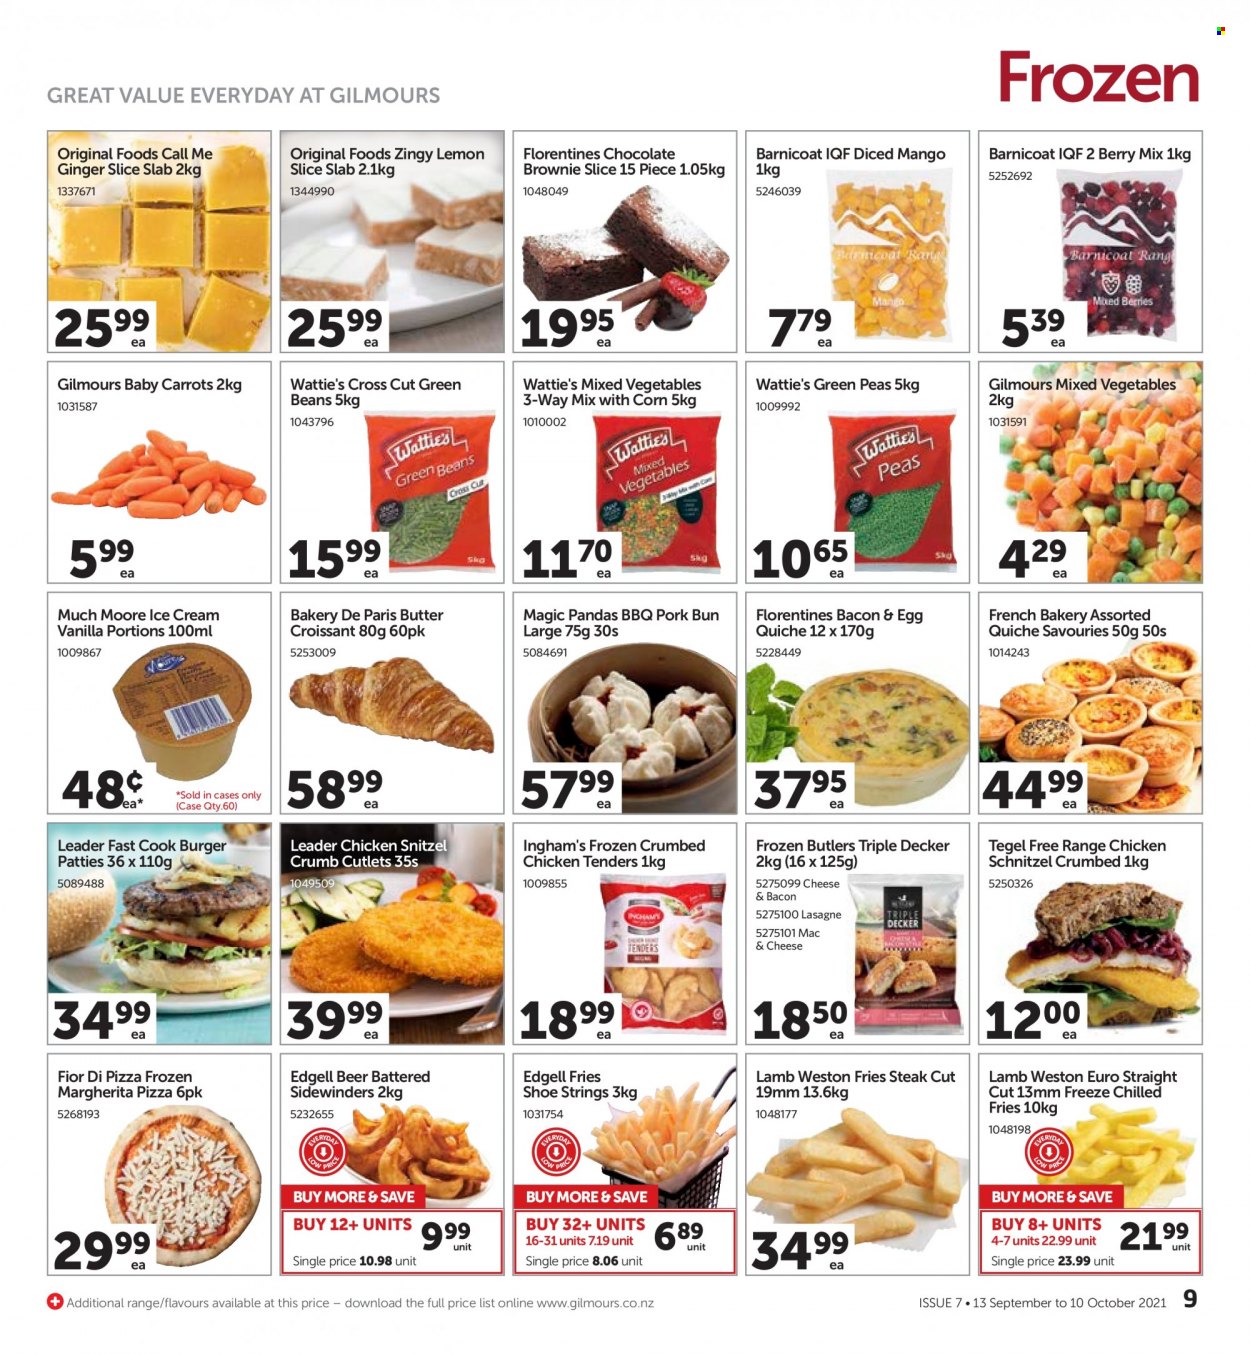 thumbnail - Gilmours mailer - 13.09.2021 - 10.10.2021 - Sales products - croissant, brownies, beans, carrots, corn, ginger, green beans, peas, pizza, hamburger, schnitzel, Wattie's, bacon, eggs, butter, ice cream, Much Moore, mixed vegetables, potato fries, quiche, beer, steak, burger patties. Page 9.